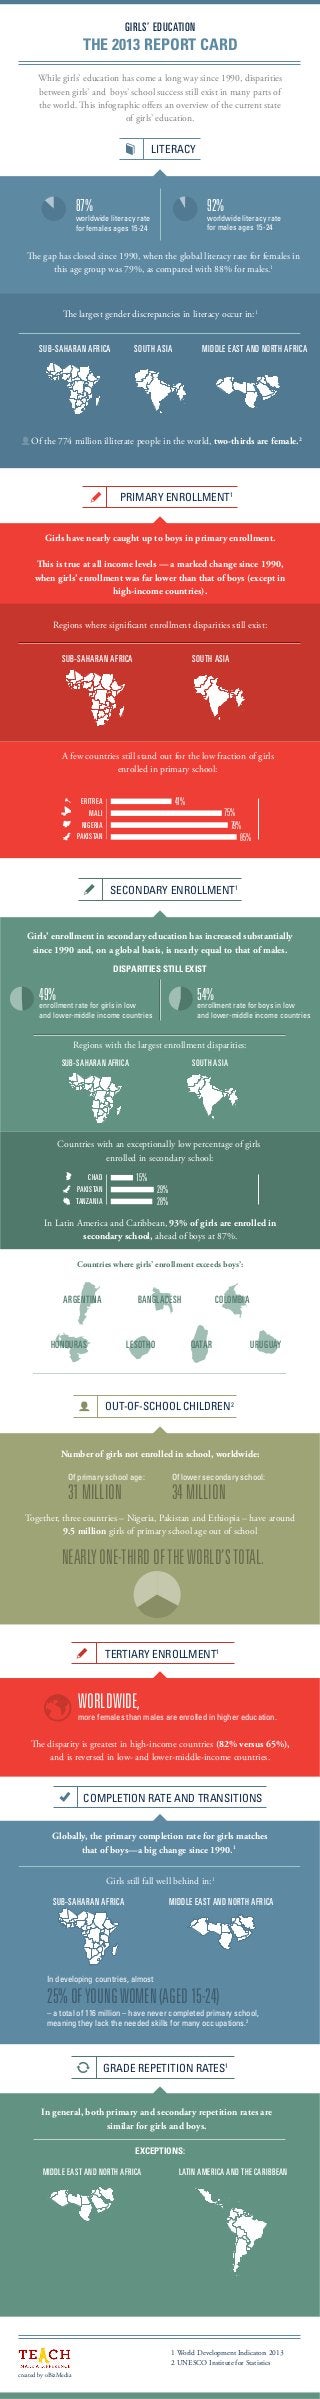 GIRLS’ EDUCATION

THE 2013 REPORT CARD
While girls’ education has come a long way since 1990, disparities
between girls’ and boys’ school success still exist in many parts of
the world. This infographic offers an overview of the current state
of girls’ education.

LITERACY

92%

87%

worldwide literacy rate
for males ages 15-24

worldwide literacy rate
for females ages 15-24

The gap has closed since 1990, when the global literacy rate for females in
this age group was 79%, as compared with 88% for males.1

The largest gender discrepancies in literacy occur in:1
SUB-SAHARAN AFRICA

SOUTH ASIA

MIDDLE EAST AND NORTH AFRICA

Of the 774 million illiterate people in the world, two-thirds are female.2

PRIMARY ENROLLMENT1

Girls have nearly caught up to boys in primary enrollment.
This is true at all income levels — a marked change since 1990,
when girls’ enrollment was far lower than that of boys (except in
high-income countries).
Regions where significant enrollment disparities still exist:
SUB-SAHARAN AFRICA

SOUTH ASIA

A few countries still stand out for the low fraction of girls
enrolled in primary school:

41%

ERITREA
MALI
NIGERIA
PAKISTAN

75%
79%
85%

SECONDARY ENROLLMENT1

Girls’ enrollment in secondary education has increased substantially
since 1990 and, on a global basis, is nearly equal to that of males.
DISPARITIES STILL EXIST

49% rate for girls in low
enrollment

54% rate for boys in low
enrollment

and lower-middle income countries

and lower-middle income countries

Regions with the largest enrollment disparities:
SUB-SAHARAN AFRICA

SOUTH ASIA

Countries with an exceptionally low percentage of girls
enrolled in secondary school:

15%

CHAD
PAKISTAN
TANZANIA

29%
28%

In Latin America and Caribbean, 93% of girls are enrolled in
secondary school, ahead of boys at 87%.
Countries where girls’ enrollment exceeds boys’:

ARGENTINA

BANGLADESH

HONDURAS

LESOTHO

COLOMBIA

QATAR

URUGUAY

OUT-OF-SCHOOL CHILDREN2

Number of girls not enrolled in school, worldwide:
Of primary school age:

31 MILLION

Of lower secondary school:

34 MILLION

Together, three countries – Nigeria, Pakistan and Ethiopia – have around
9.5 million girls of primary school age out of school

NEARLY ONE-THIRD OF THE WORLD’S TOTAL.

TERTIARY ENROLLMENT1

WORLDWIDE,

more females than males are enrolled in higher education.

The disparity is greatest in high-income countries (82% versus 65%),
and is reversed in low- and lower-middle-income countries.

COMPLETION RATE AND TRANSITIONS
Globally, the primary completion rate for girls matches
that of boys—a big change since 1990.1
Girls still fall well behind in:1
SUB-SAHARAN AFRICA

MIDDLE EAST AND NORTH AFRICA

In developing countries, almost

25% OF YOUNG WOMEN (AGED 15-24)
– a total of 116 million – have never completed primary school,
meaning they lack the needed skills for many occupations.2

GRADE REPETITION RATES1

In general, both primary and secondary repetition rates are
similar for girls and boys.
EXCEPTIONS:
MIDDLE EAST AND NORTH AFRICA

LATIN AMERICA AND THE CARIBBEAN

1 World Development Indicators 2013
2 UNESCO Institute for Statistics
created by oBizMedia

 